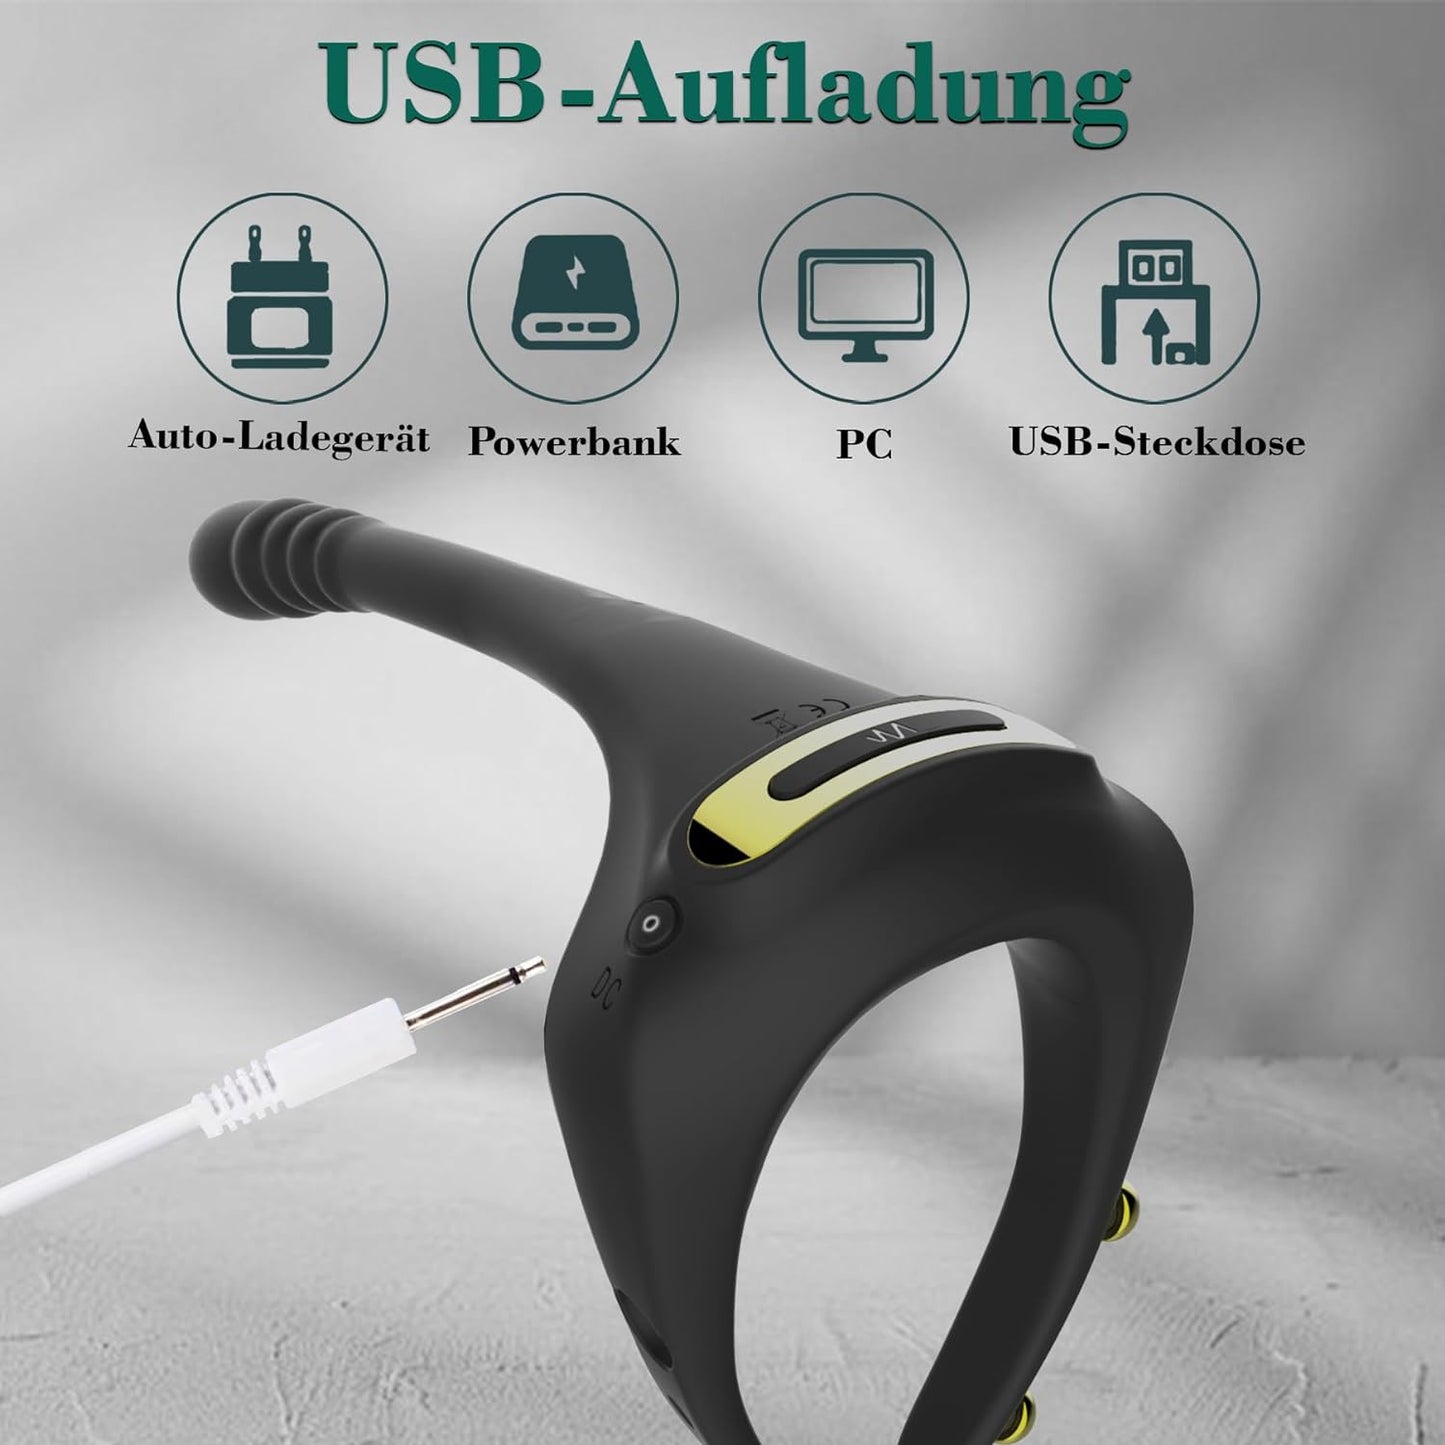 3-in-1 multifunctional vibrator penis ring prostate stimulation with 10 vibration modes 